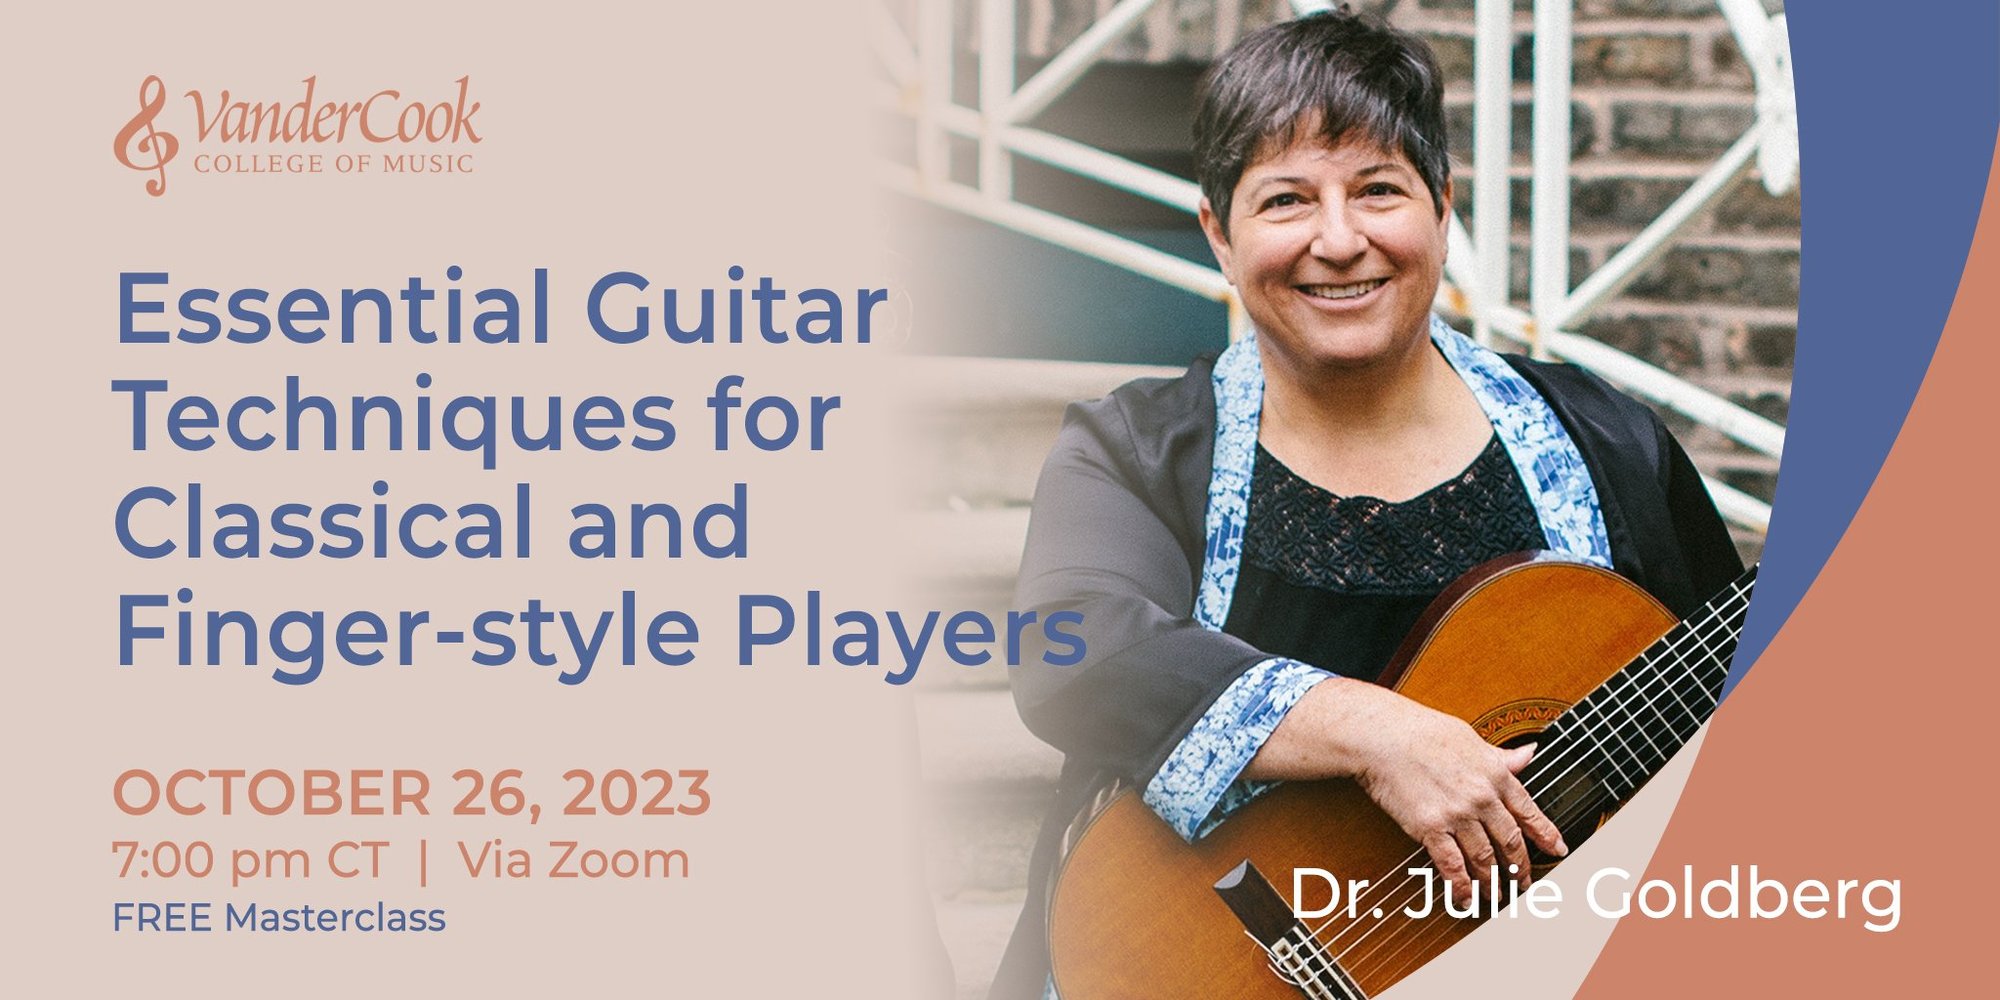 HUB---Guitar-Master-Class---Essential-Guitar-Techniques-for-Classical-and-Finger-style-Players---Dr.-Goldberg-FA23